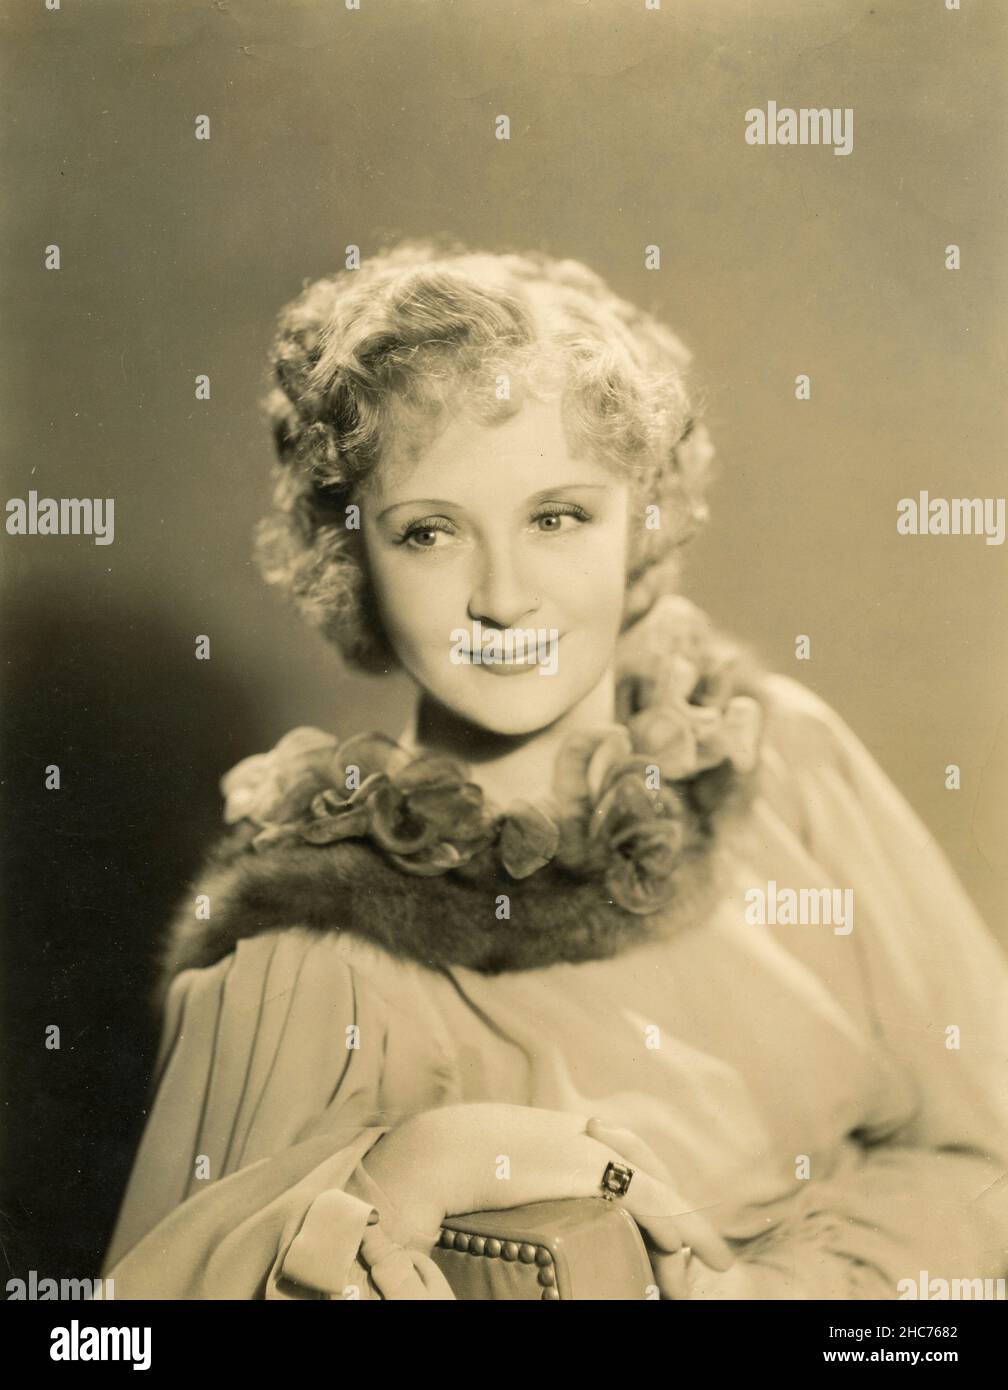 American actress Billie Burke in the movie Merrily We Live, USA 1938 Stock Photo